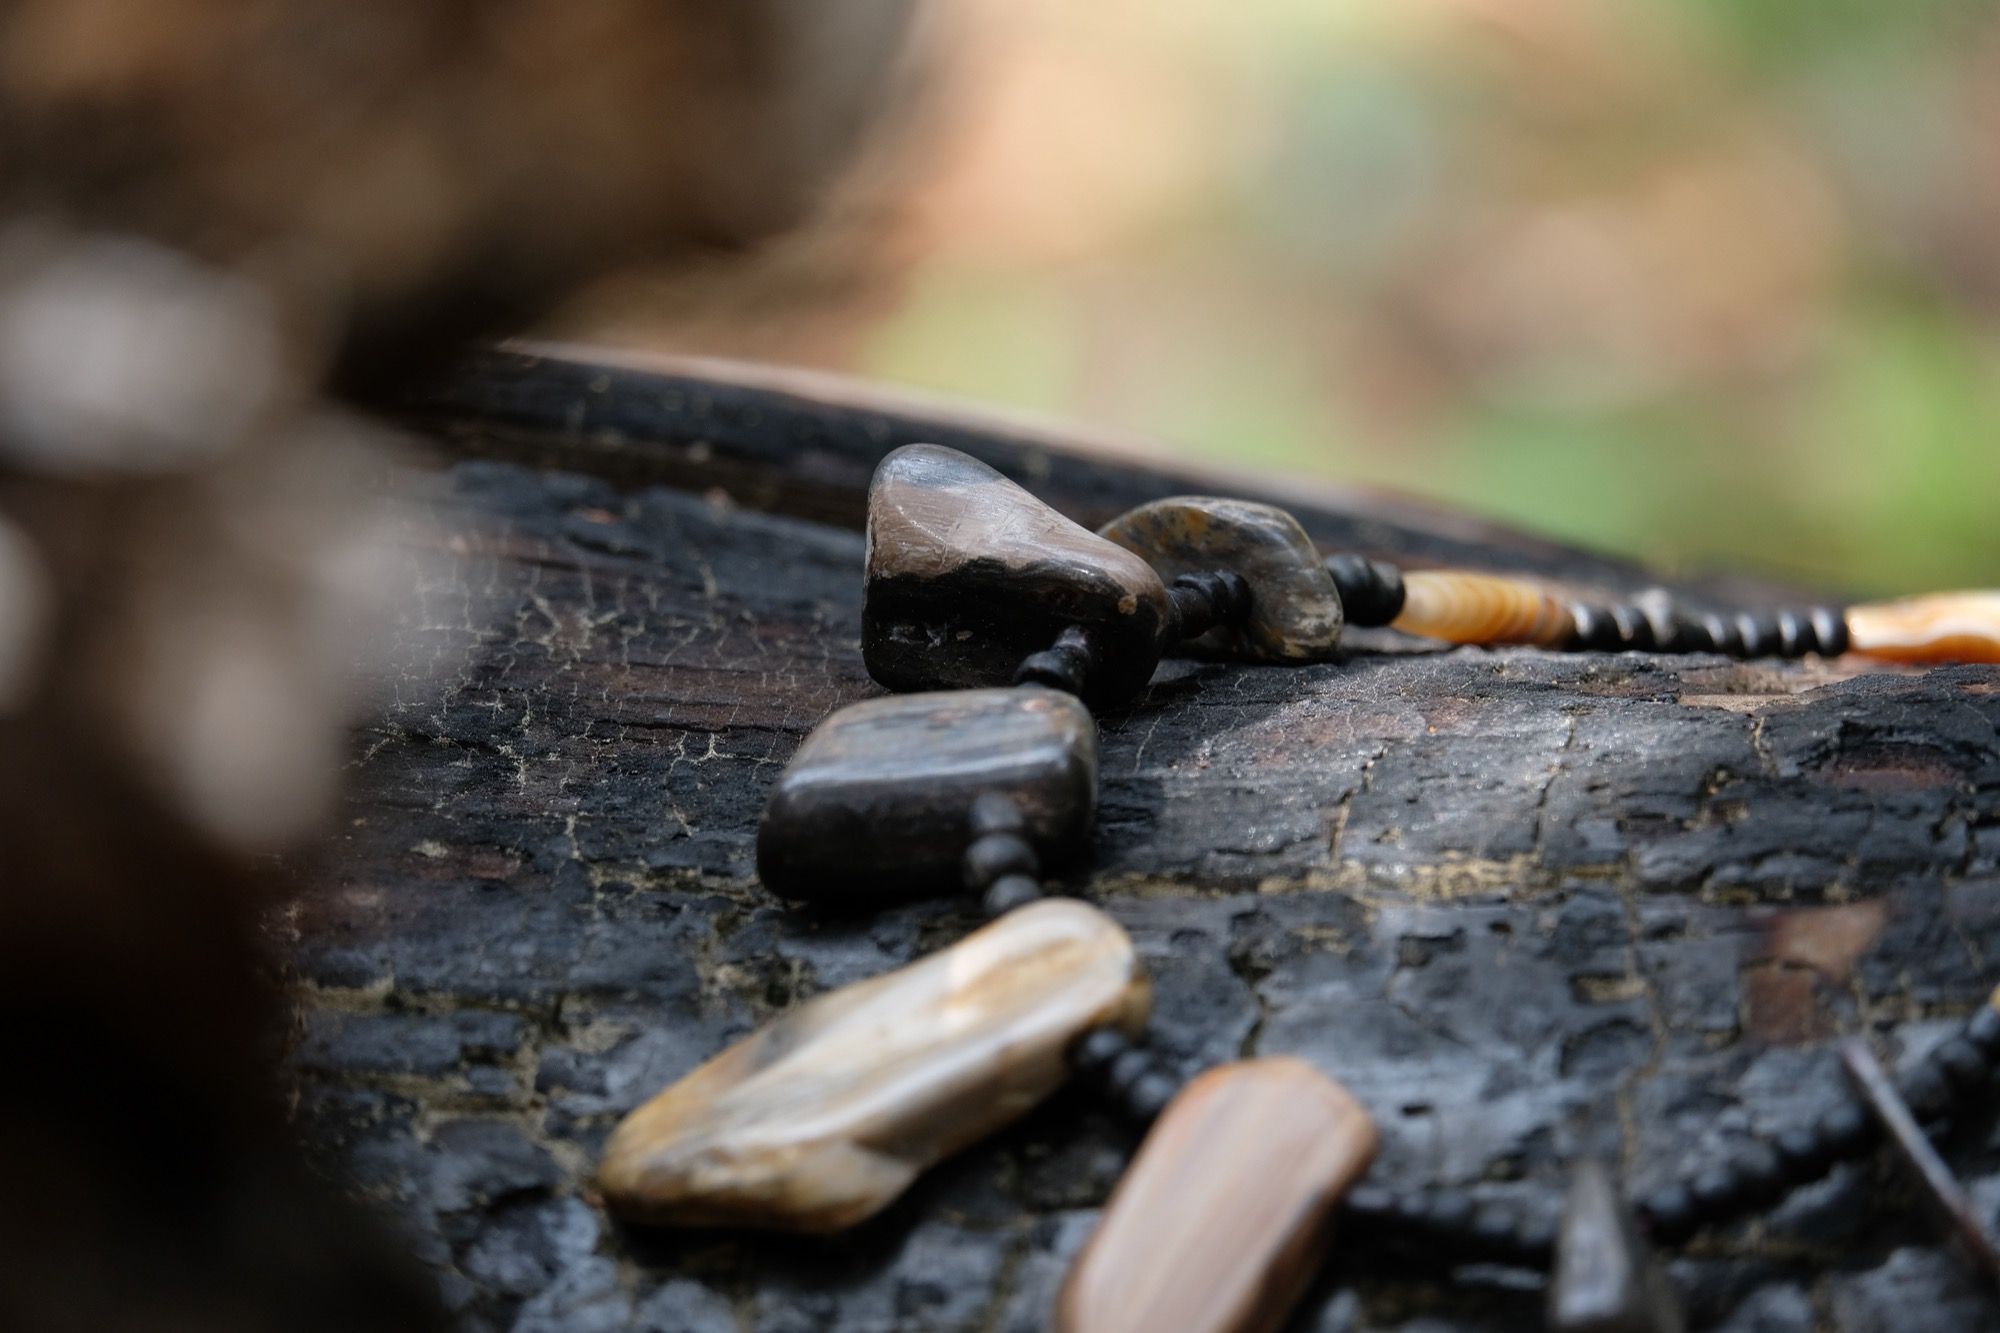 Detail of necklace with petrified wood and black beads sitting on a burned log